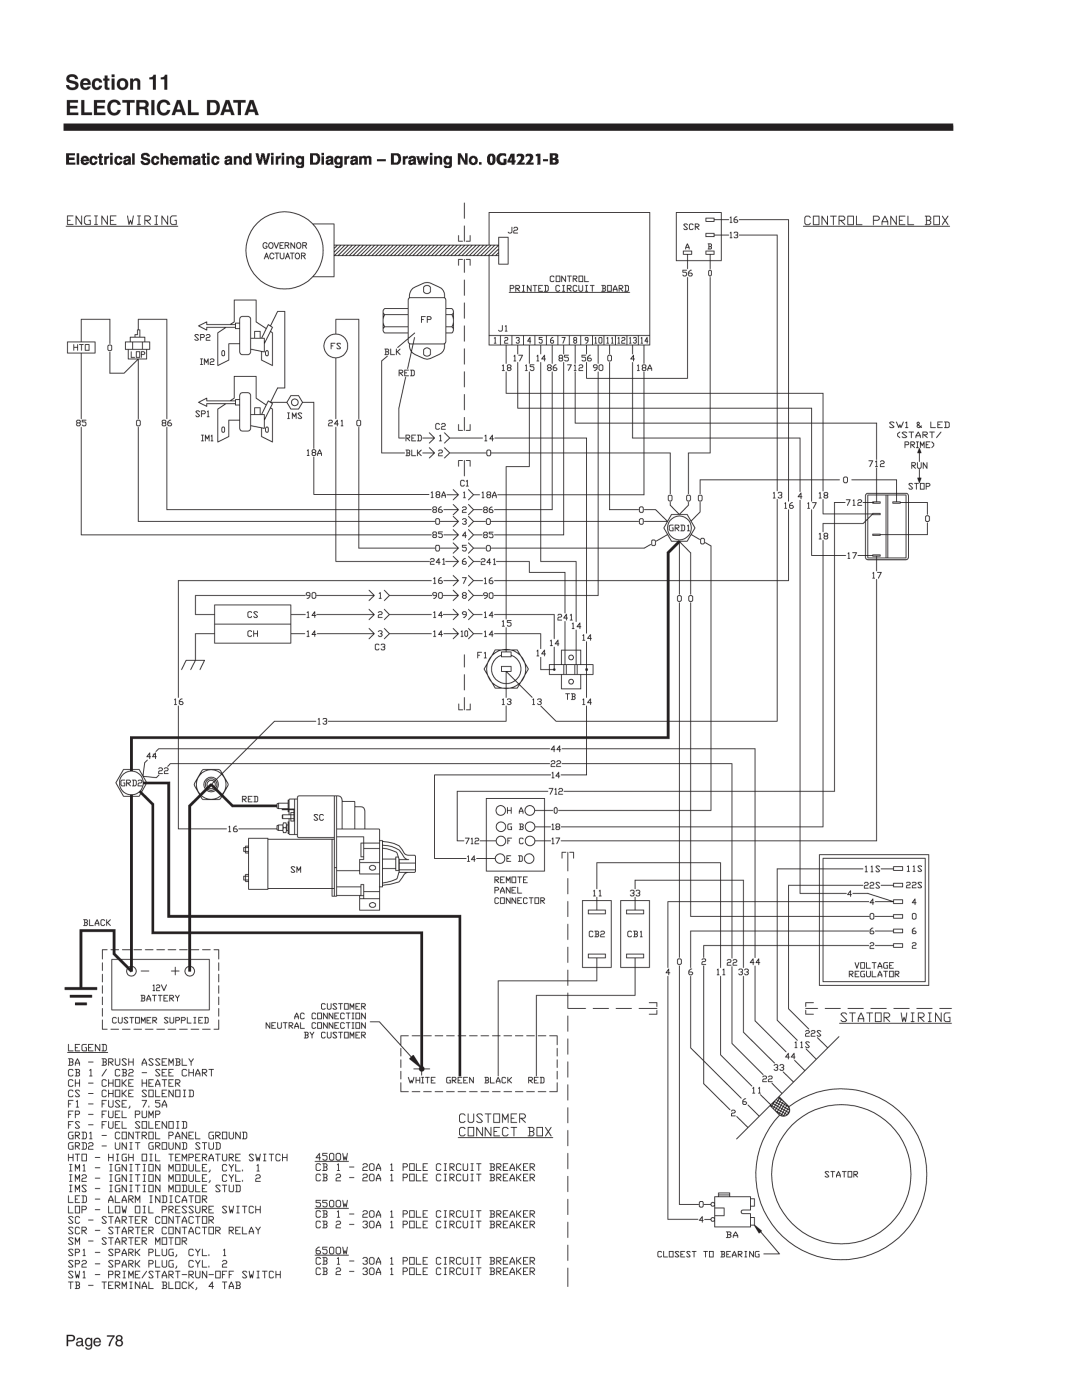 Generac Power Systems 5413, 5412 Section ELECTRICAL DATA, Electrical Schematic and Wiring Diagram - Drawing No. 0G4221-B 